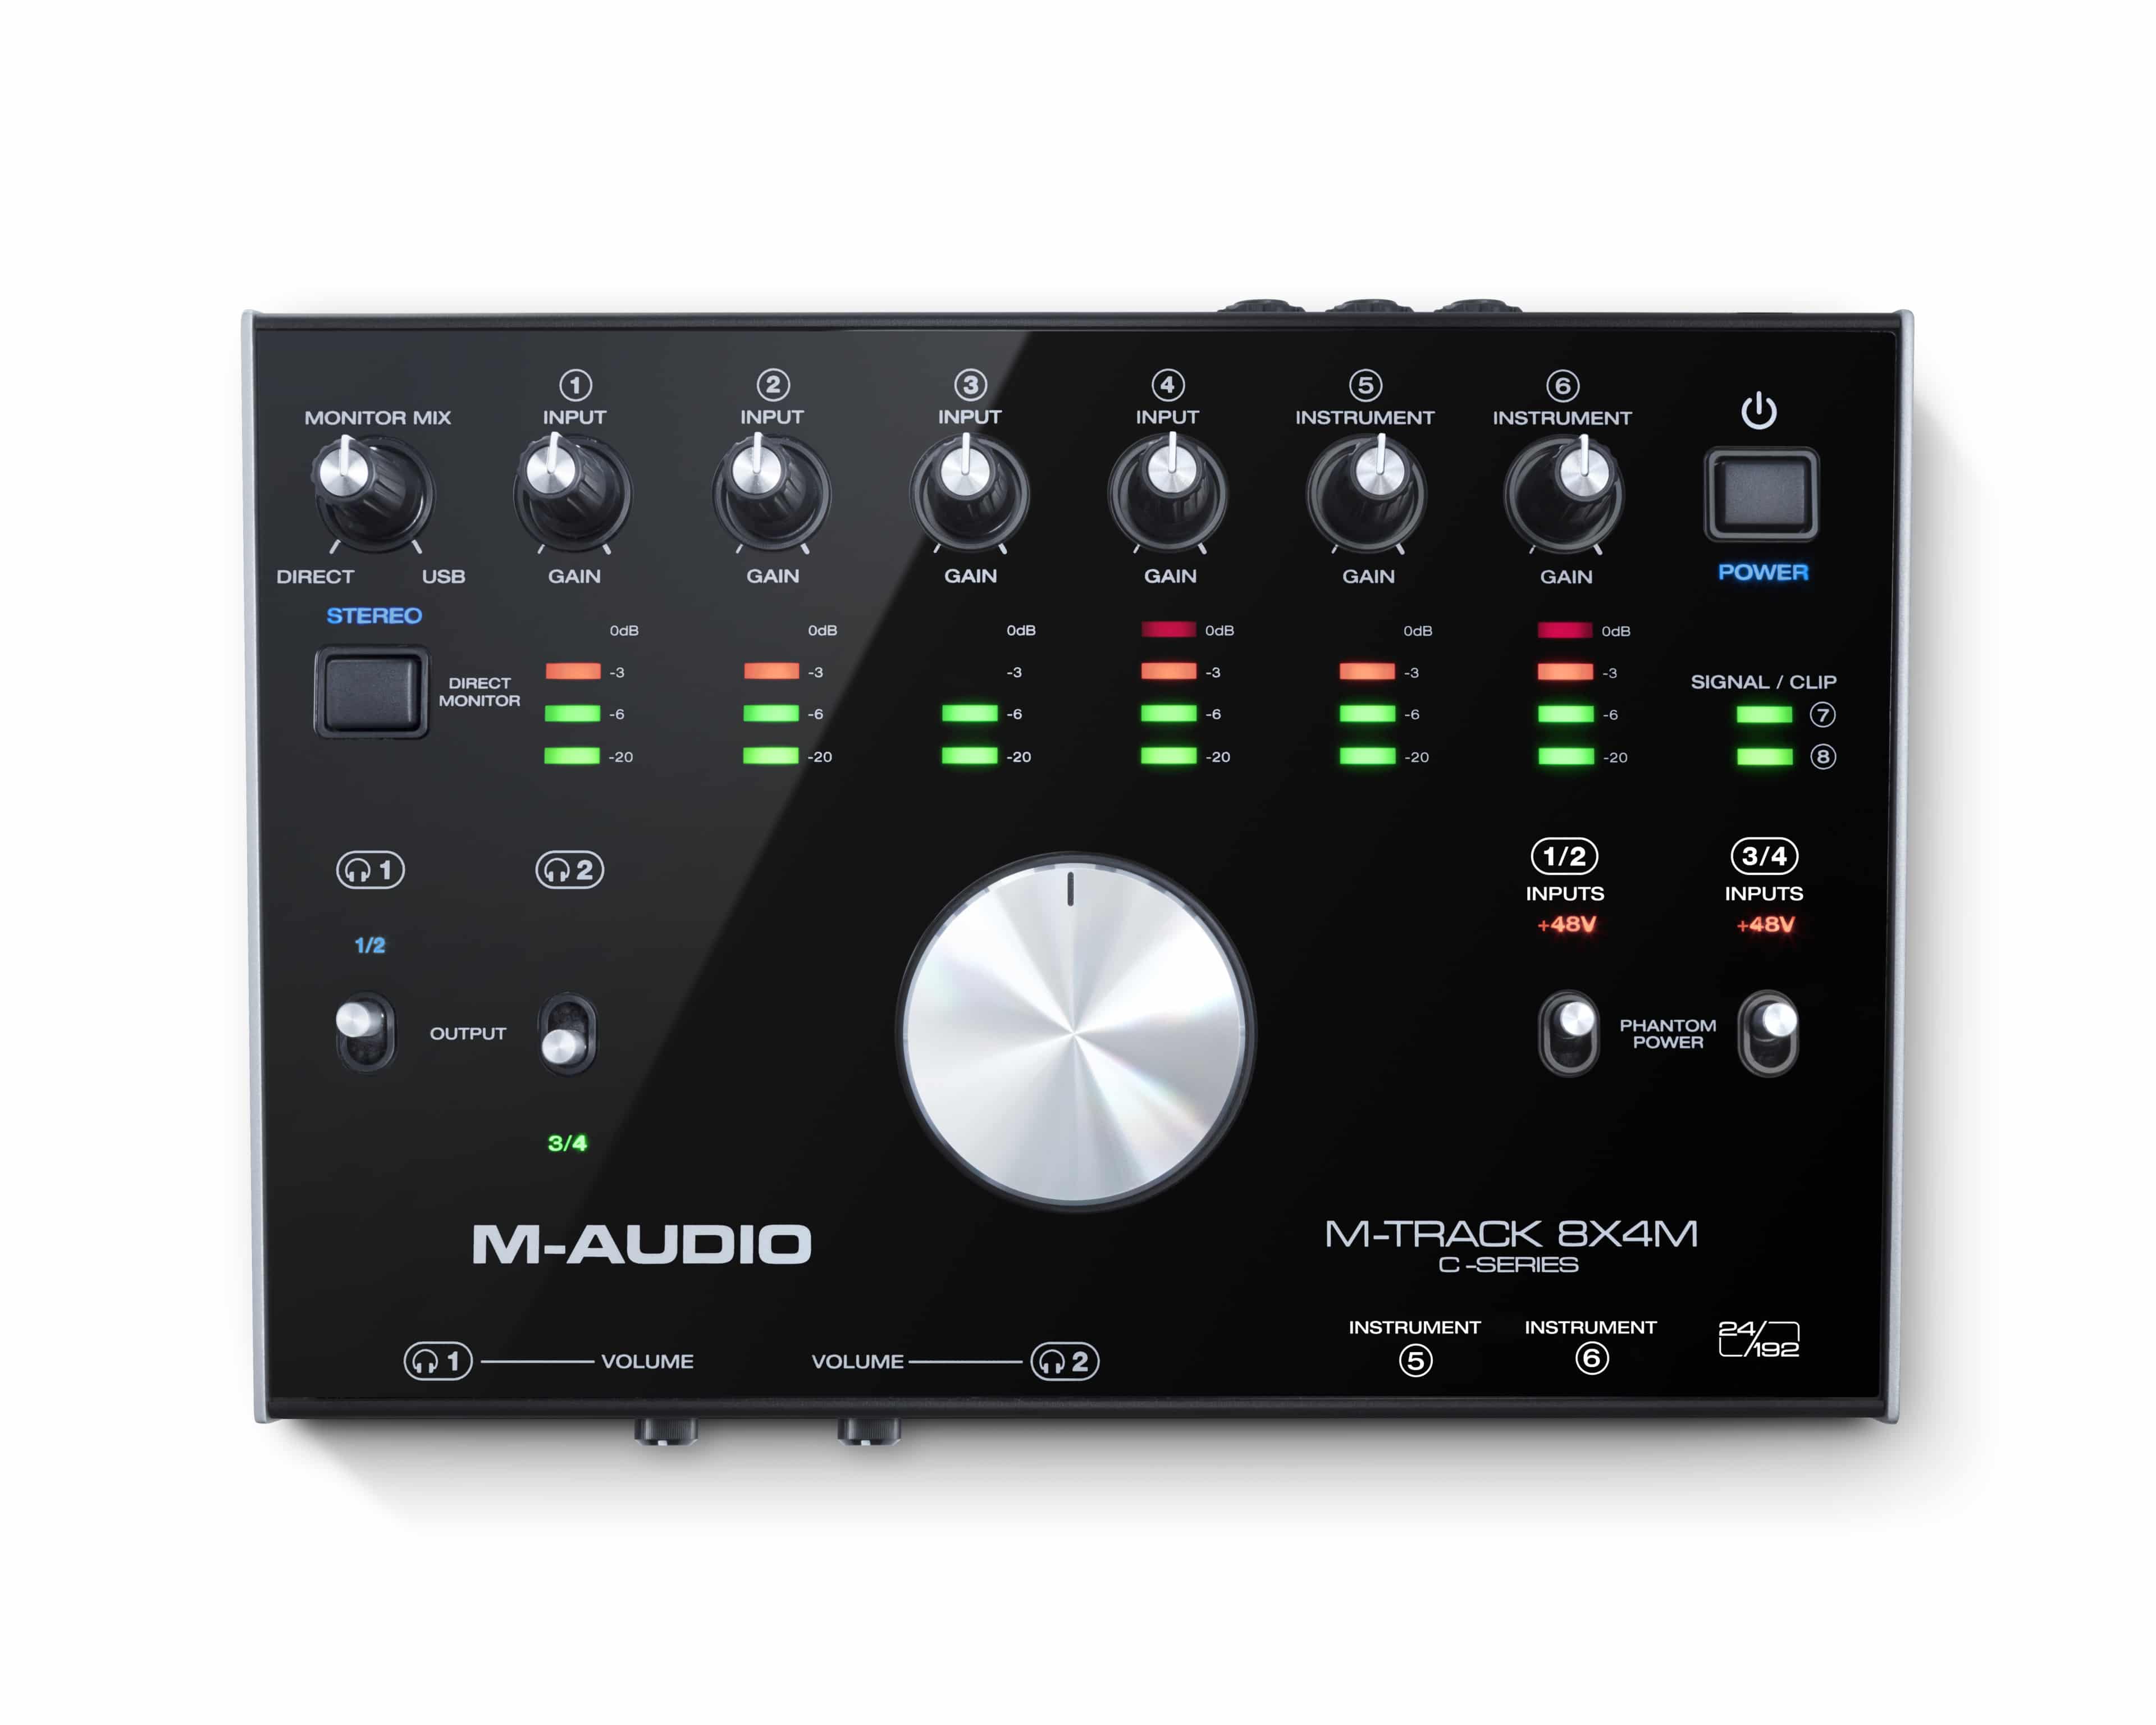 M-Audio® Introduces M-Track 8x4m Feature-Packed Usb Audio Interface, The “Heart Of Your Studio”